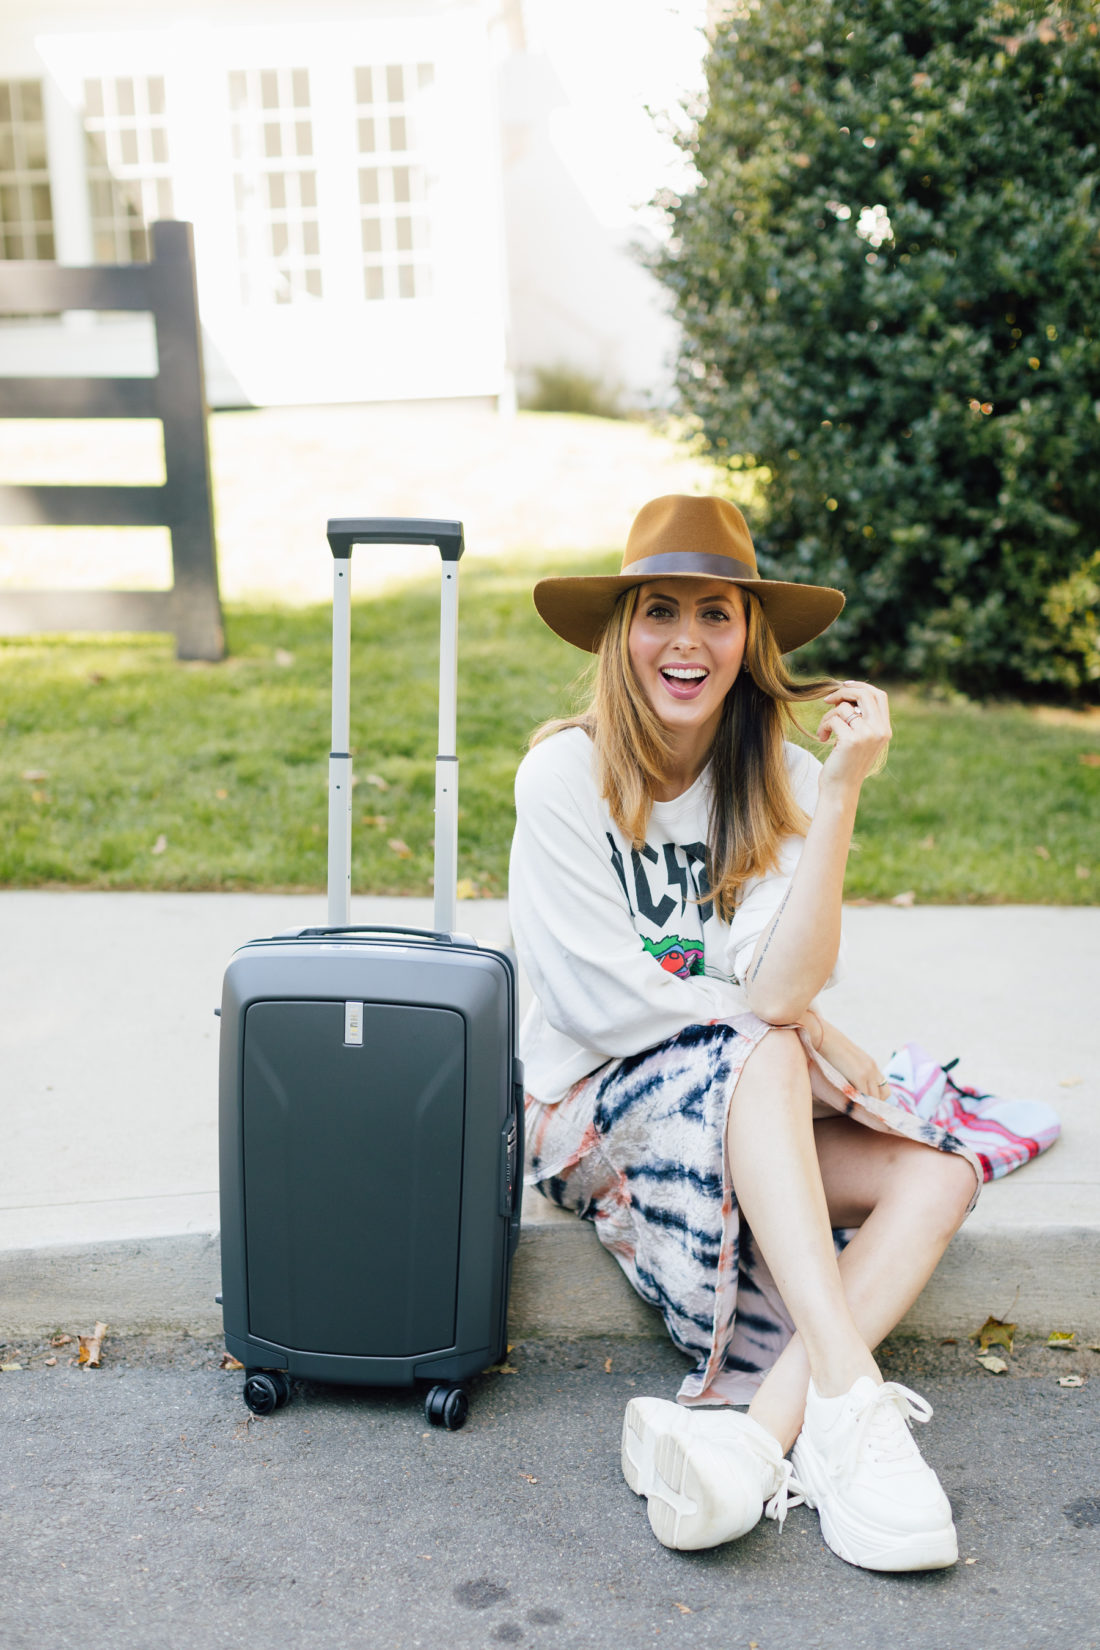 Eva Amurri Martino wears festival chic clothing and poses with Thule luggage outside her connecticut home